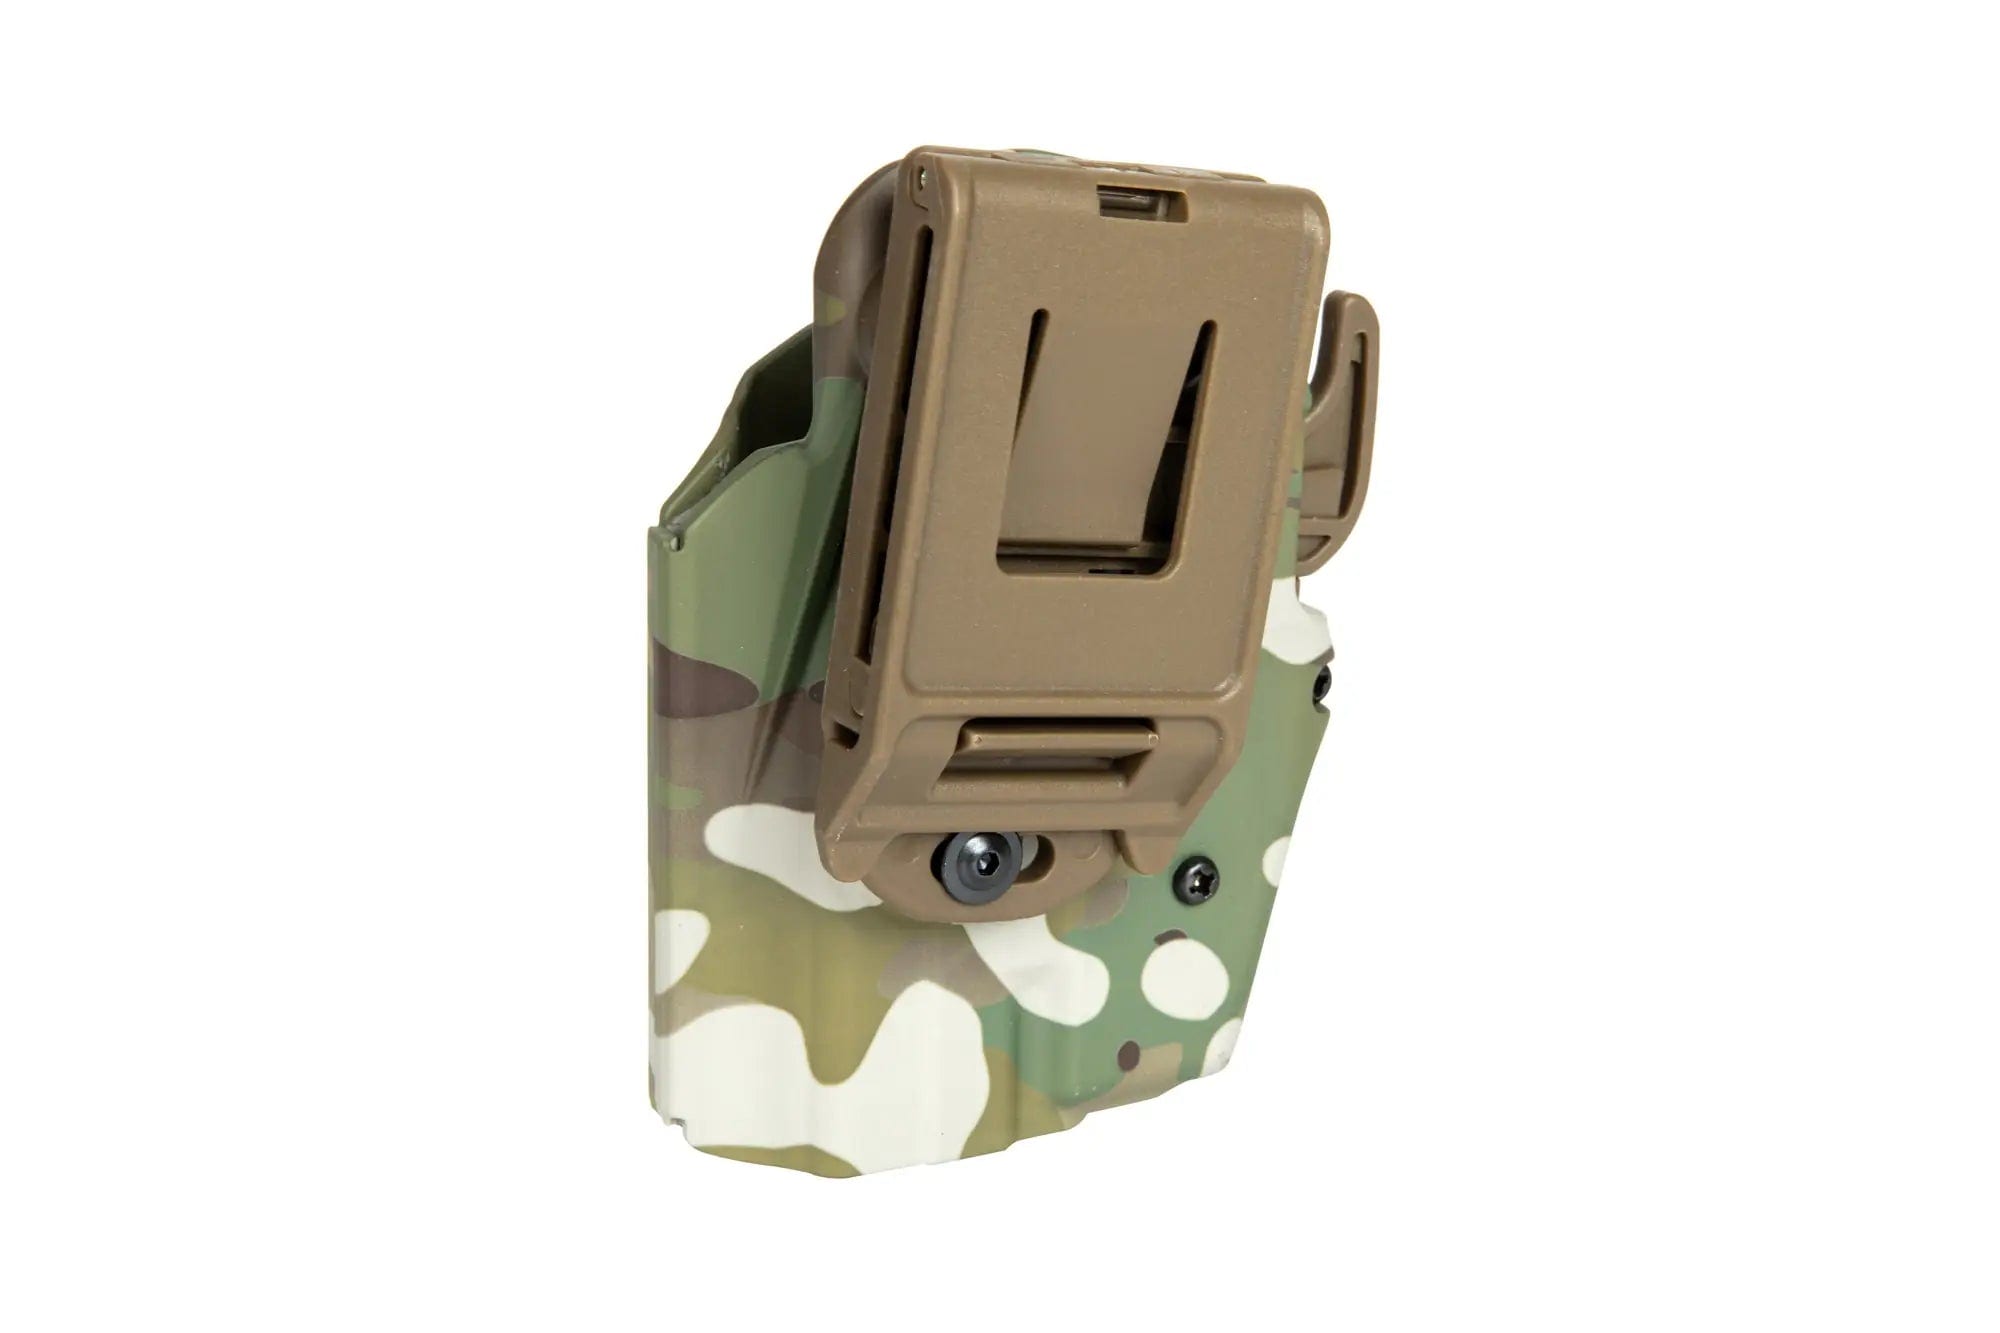 Universal Holster Sub-Compact (183) - Multicam